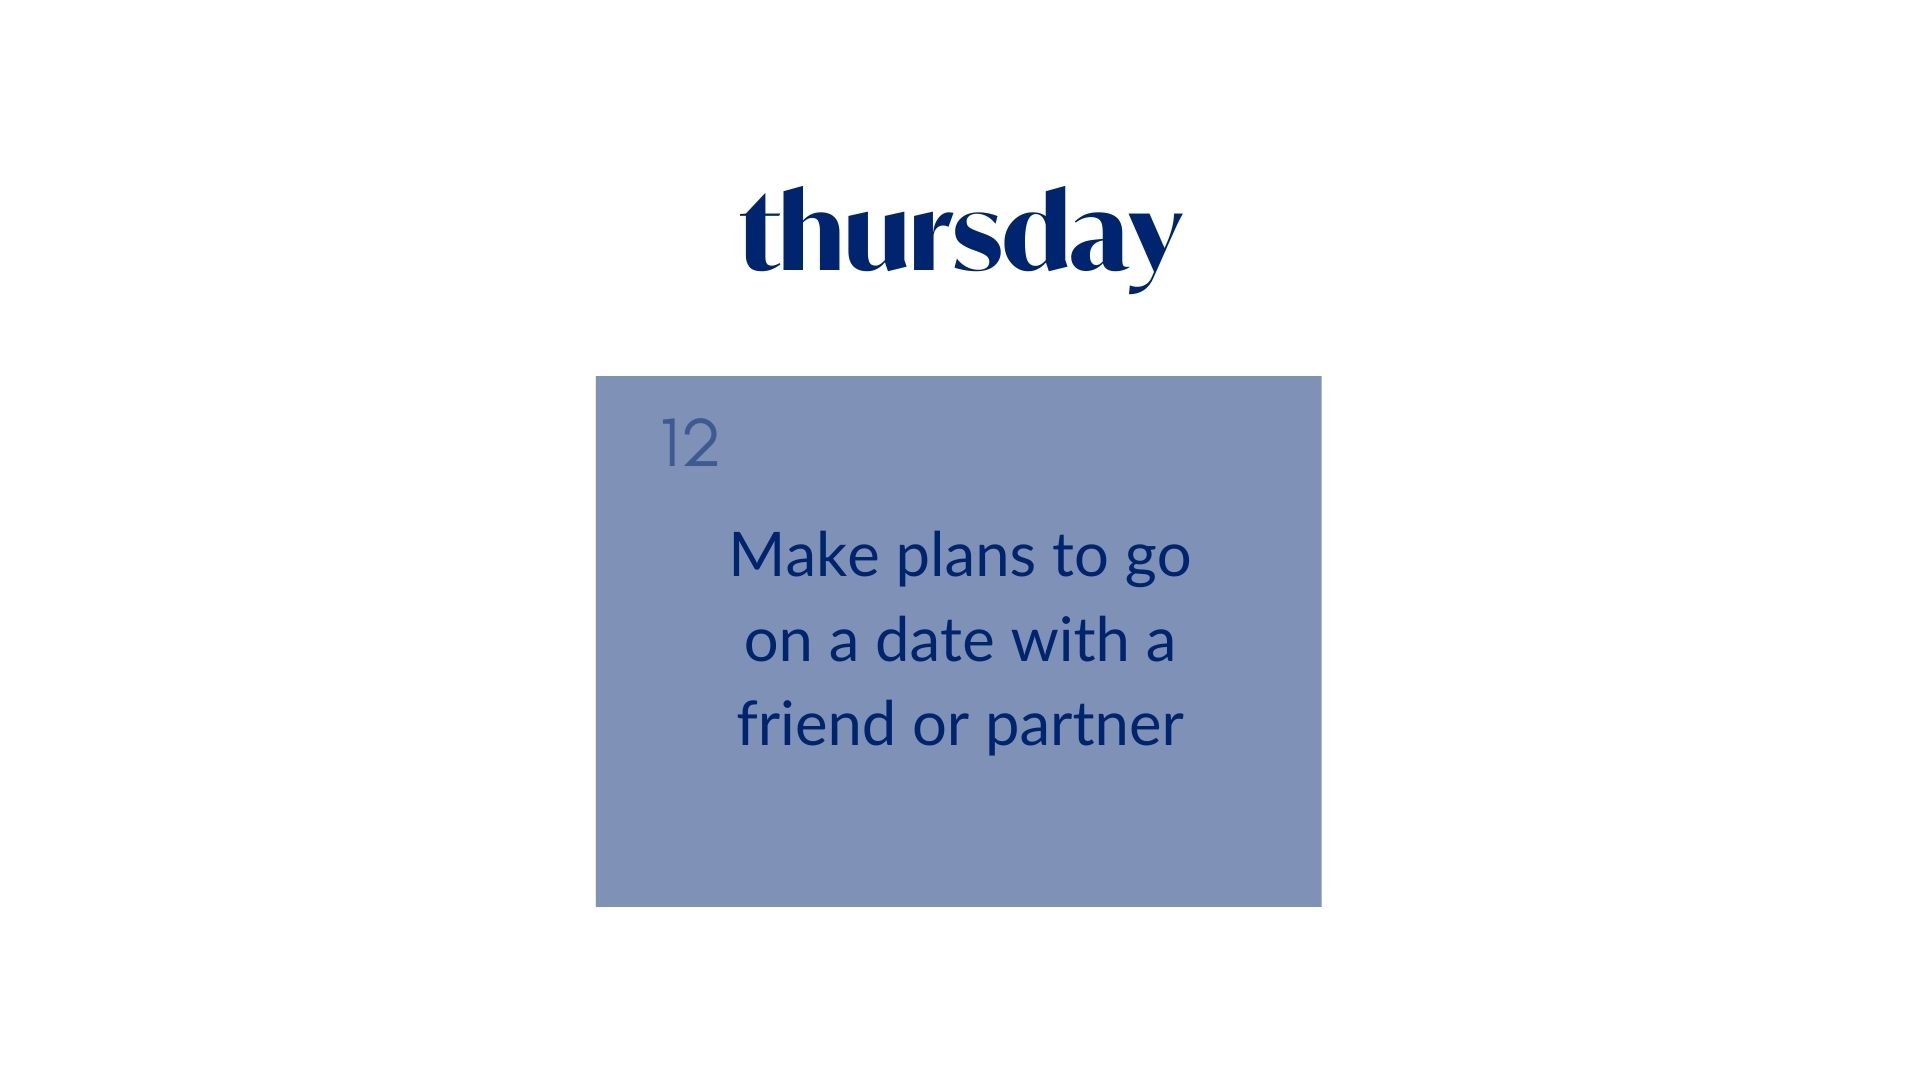 Day 12: Make plans to go on a date with a friend or partner